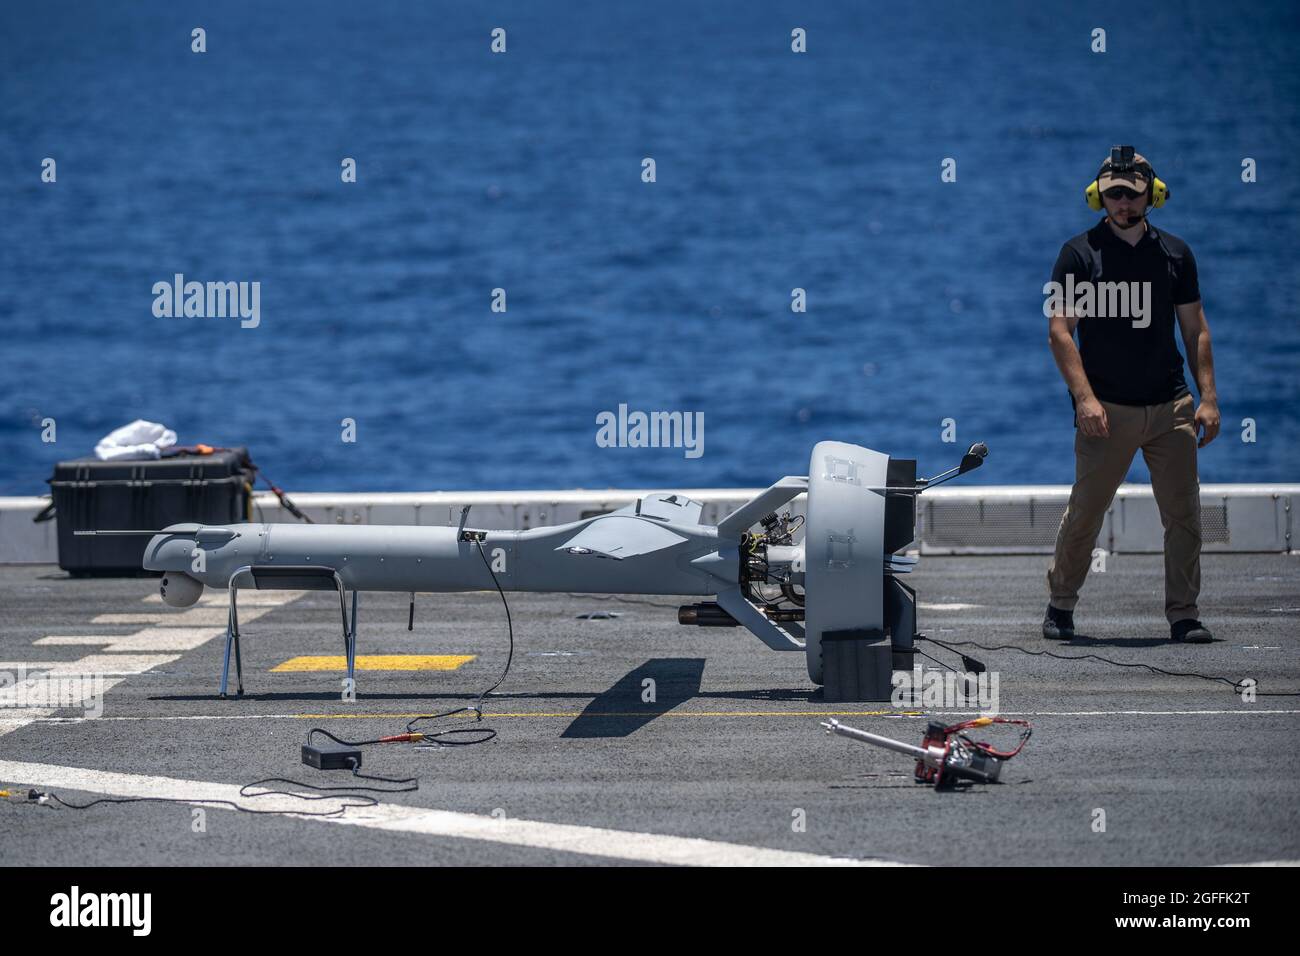 The U.S. Navy unmanned aerial vehicle operator, inspects a VBAT Unmanned Aerial System during pre-flight checks aboard amphibious transport dock USS Portland August 17, 2021 in the Pacific Ocean. Stock Photo